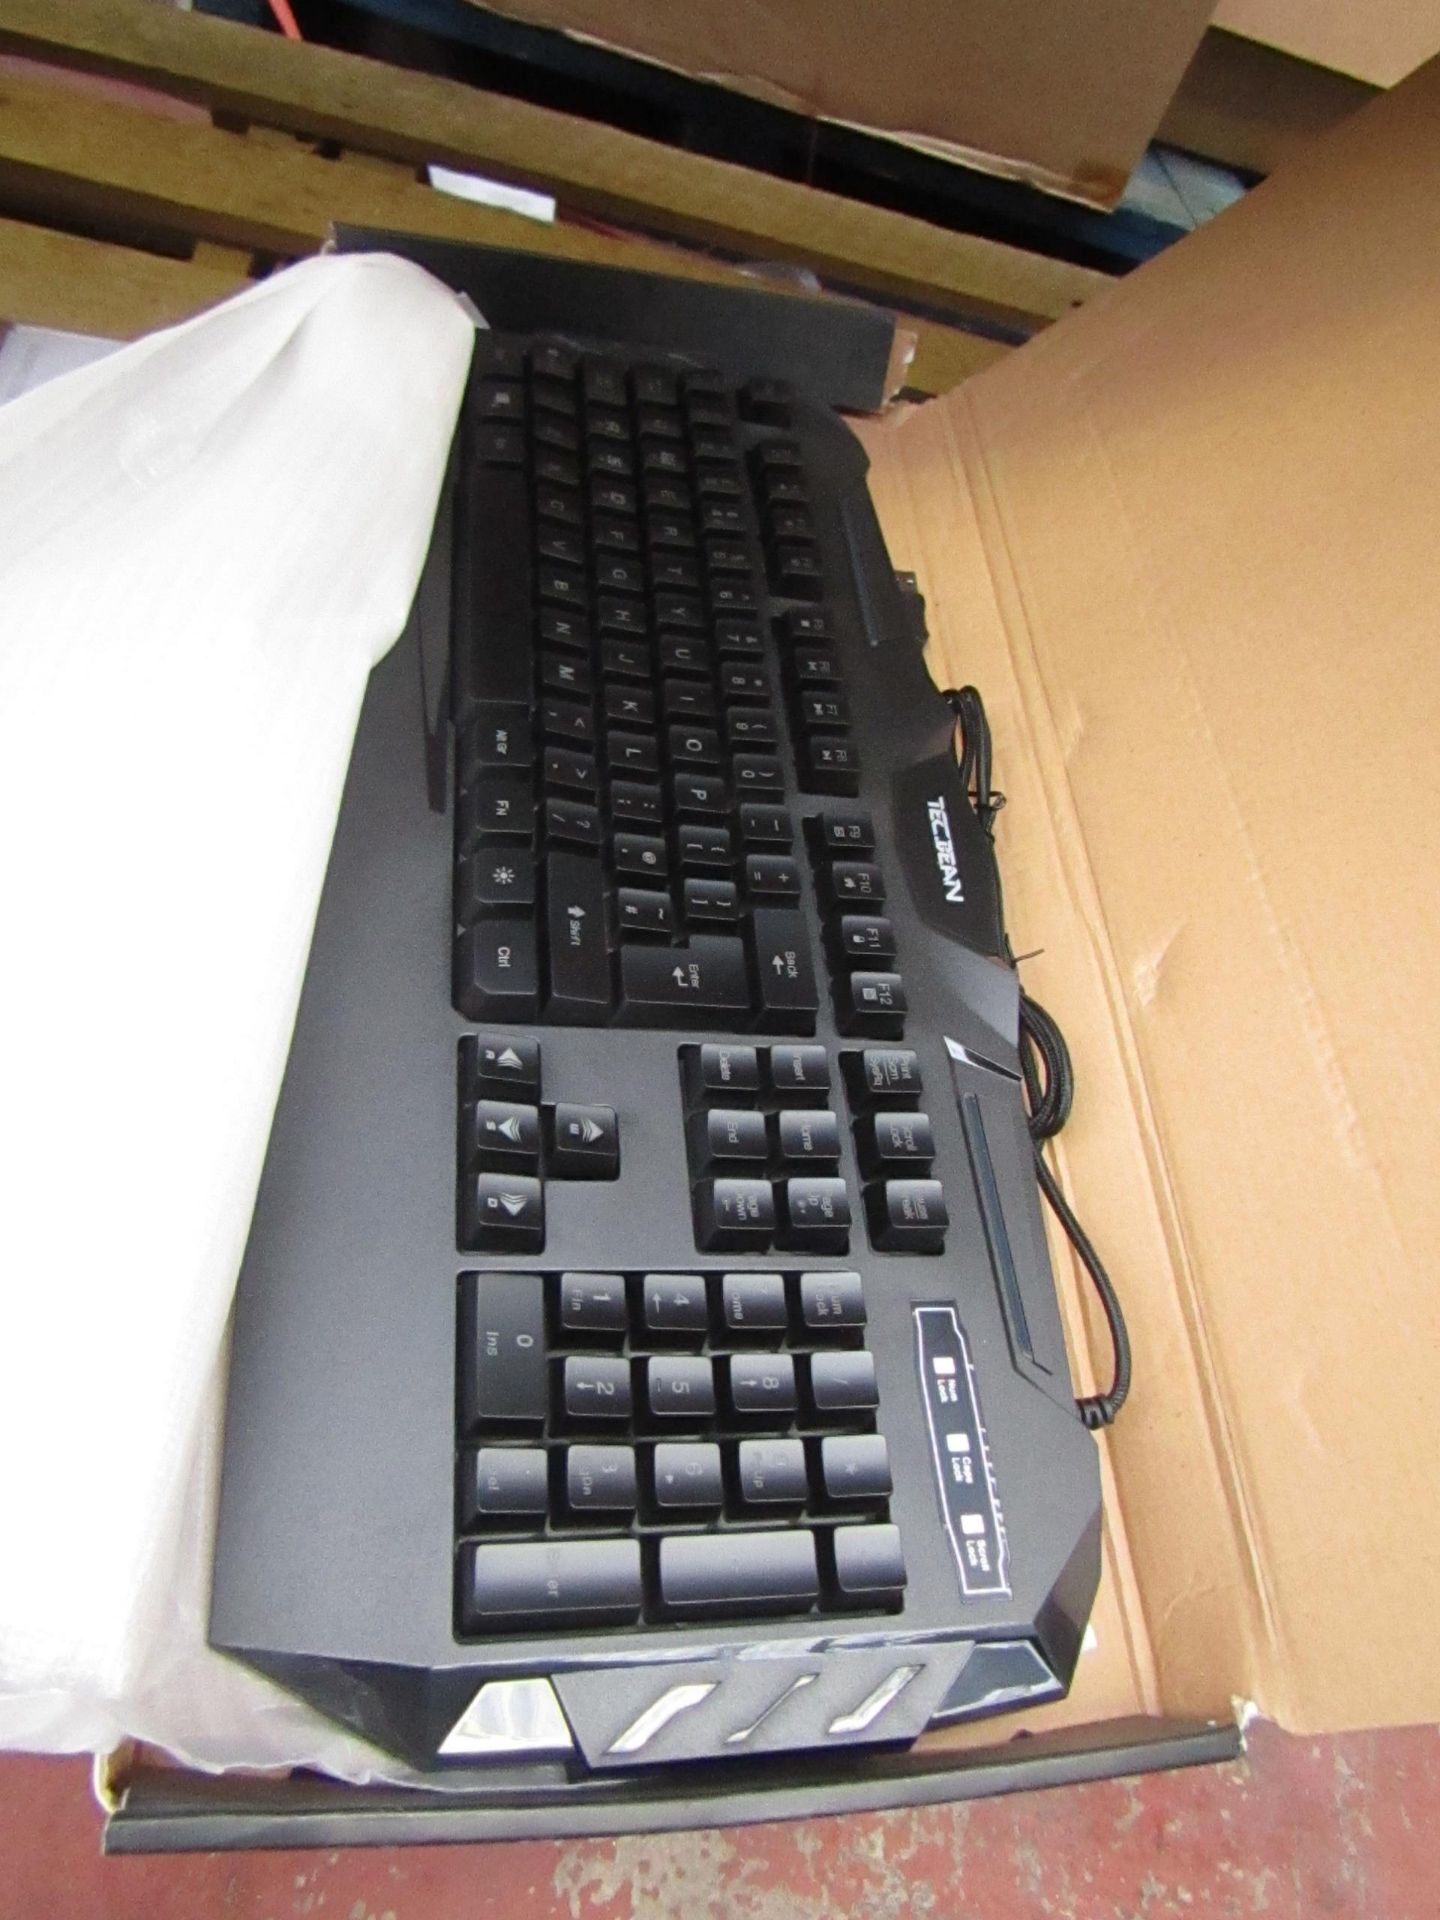 Tec.Bean gaming keyboard for PC, unchecked and boxed.